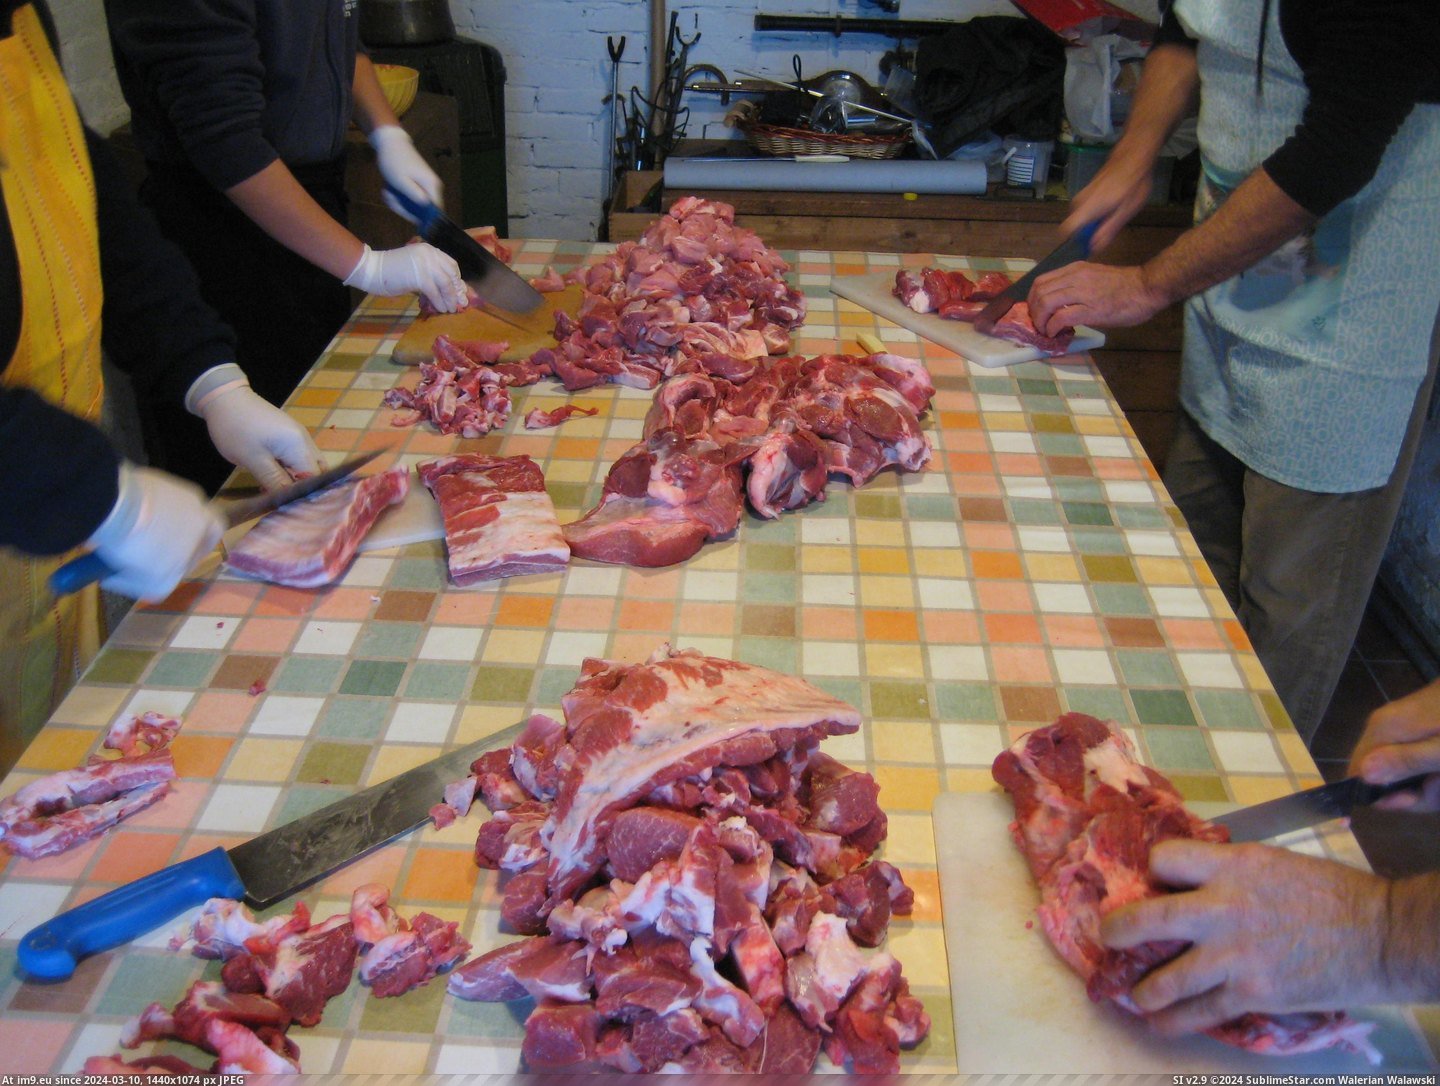 #Making #Homemade #Italy [Pics] Making homemade salami in Italy 6 Pic. (Image of album My r/PICS favs))